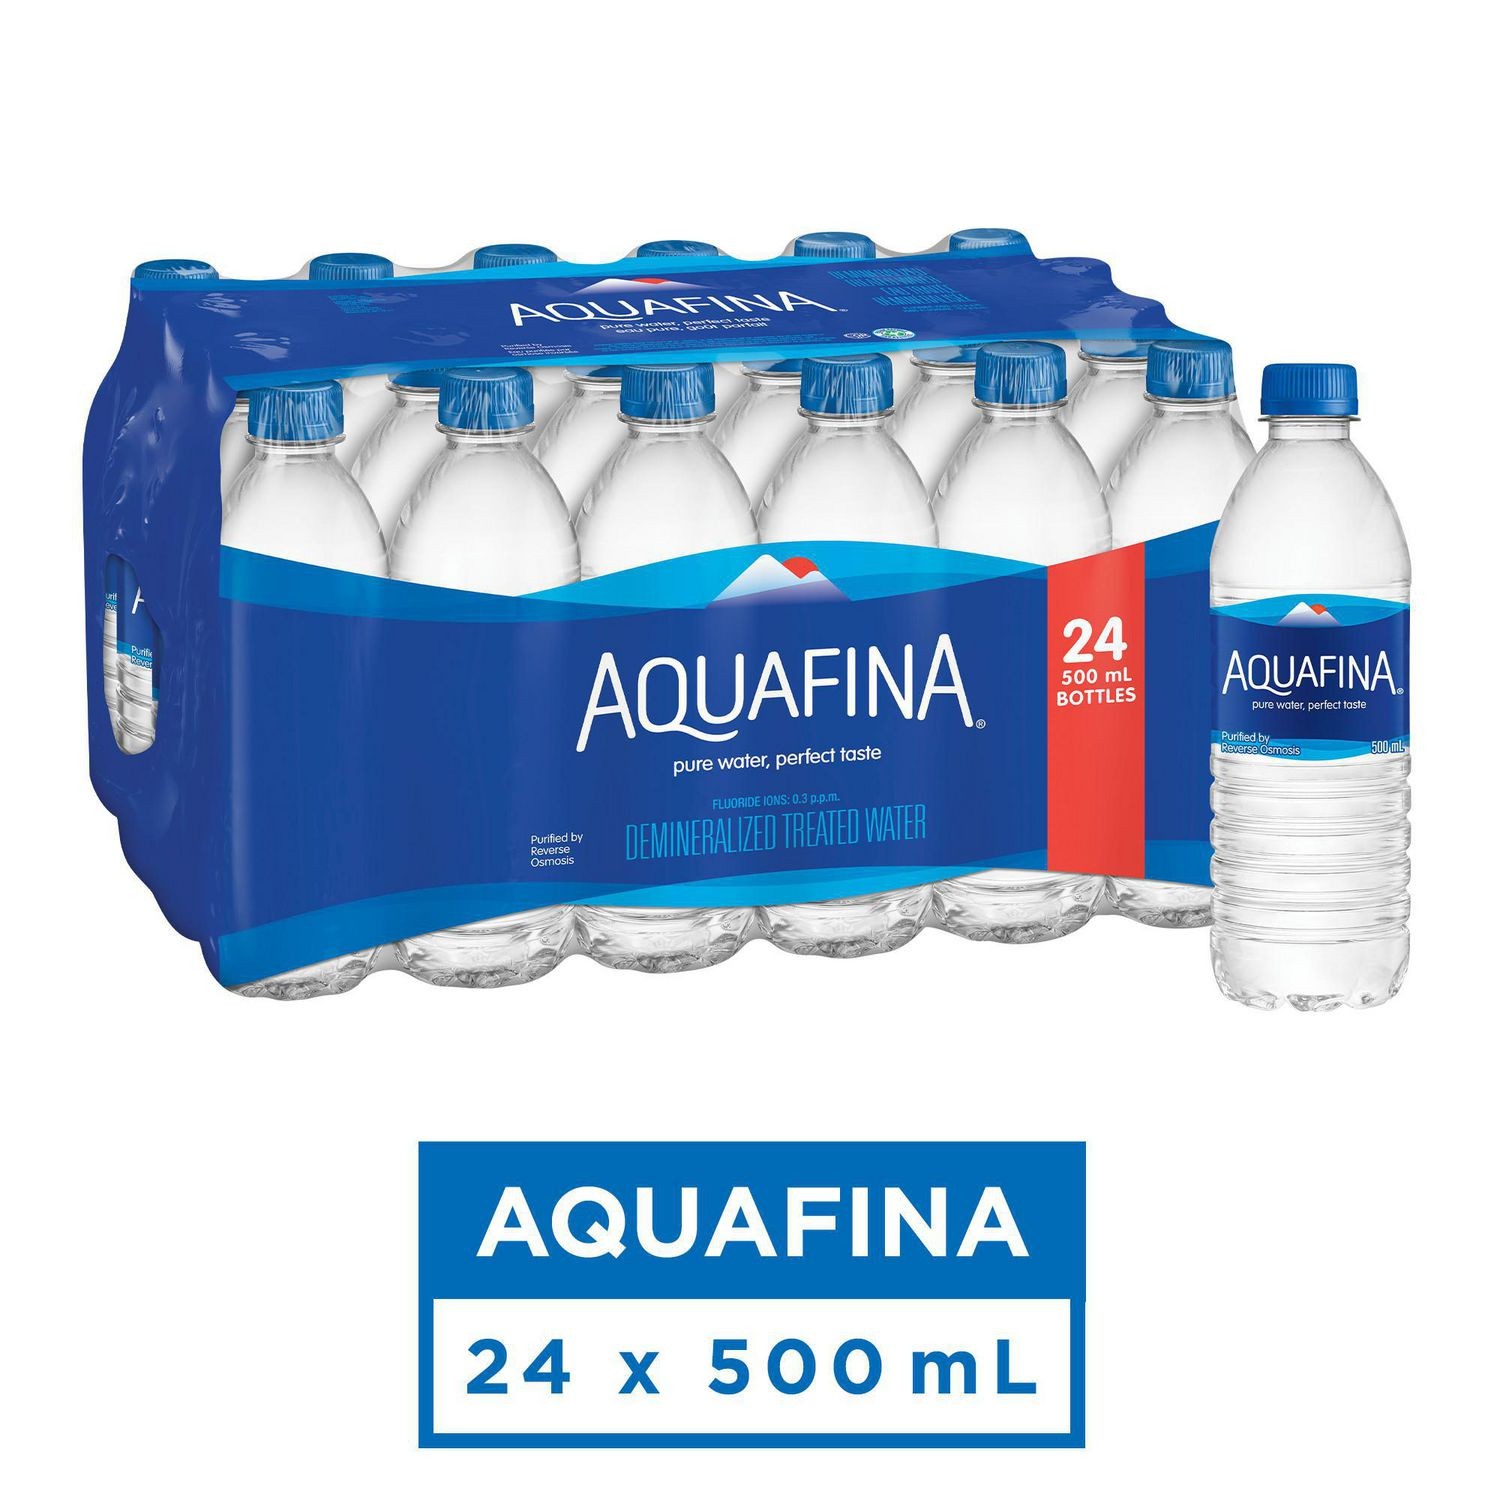 aquafina-demineralized-treated-water-limit-1-per-order-delivery-only